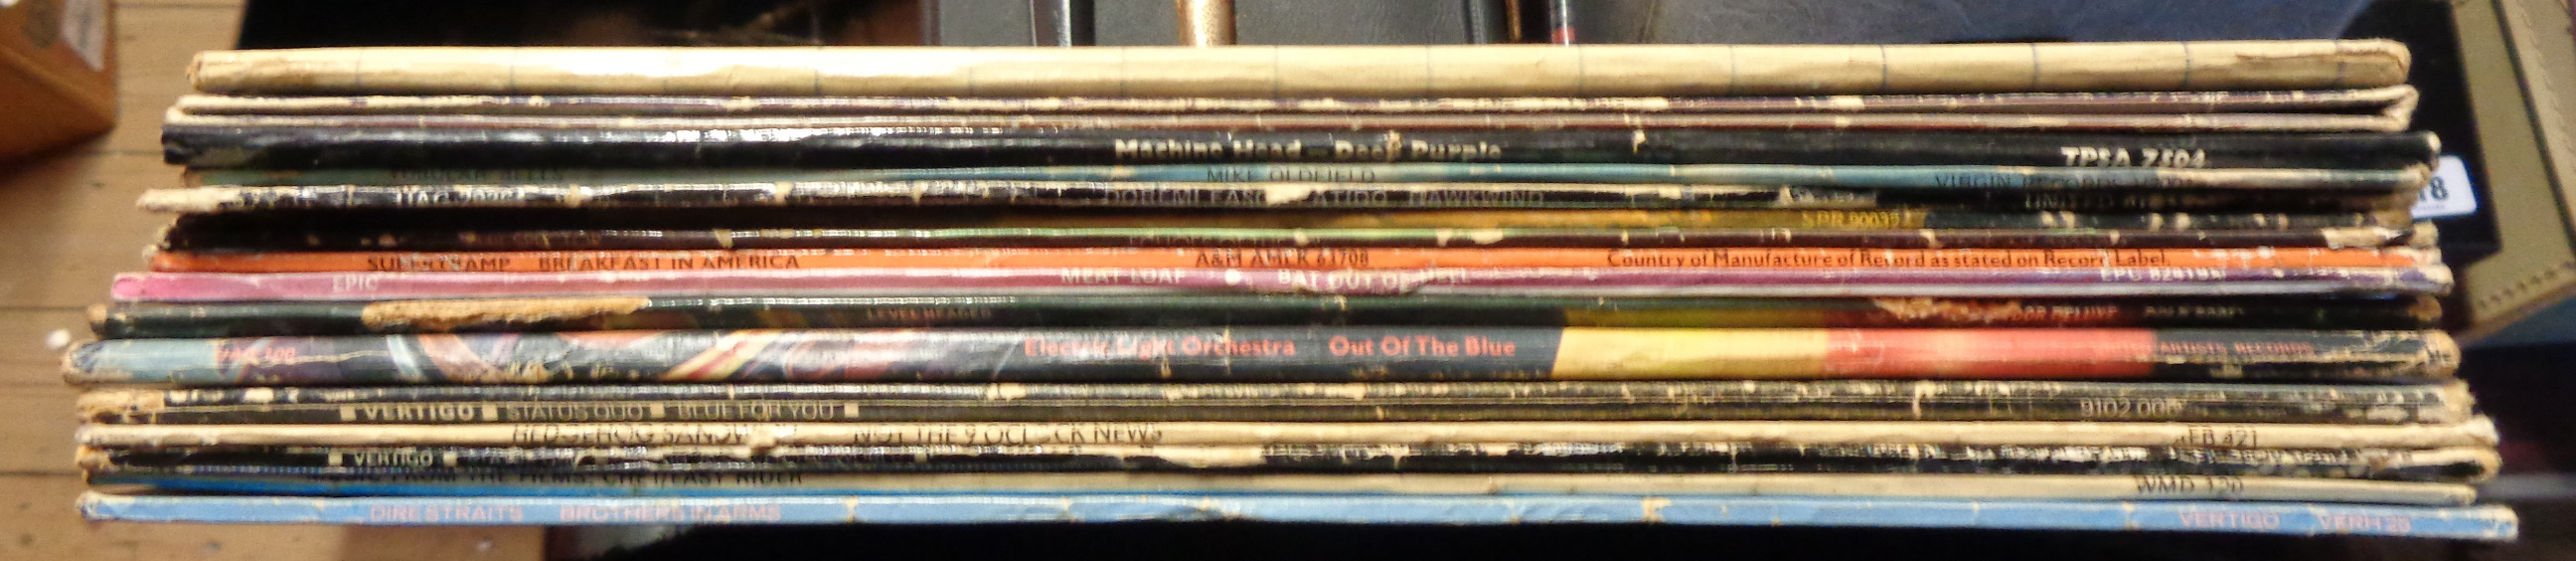 A small selection of vinyl LP records Pink Floyd, Styx, Deep Purple, Machinehead, Meat Loaf, etc.